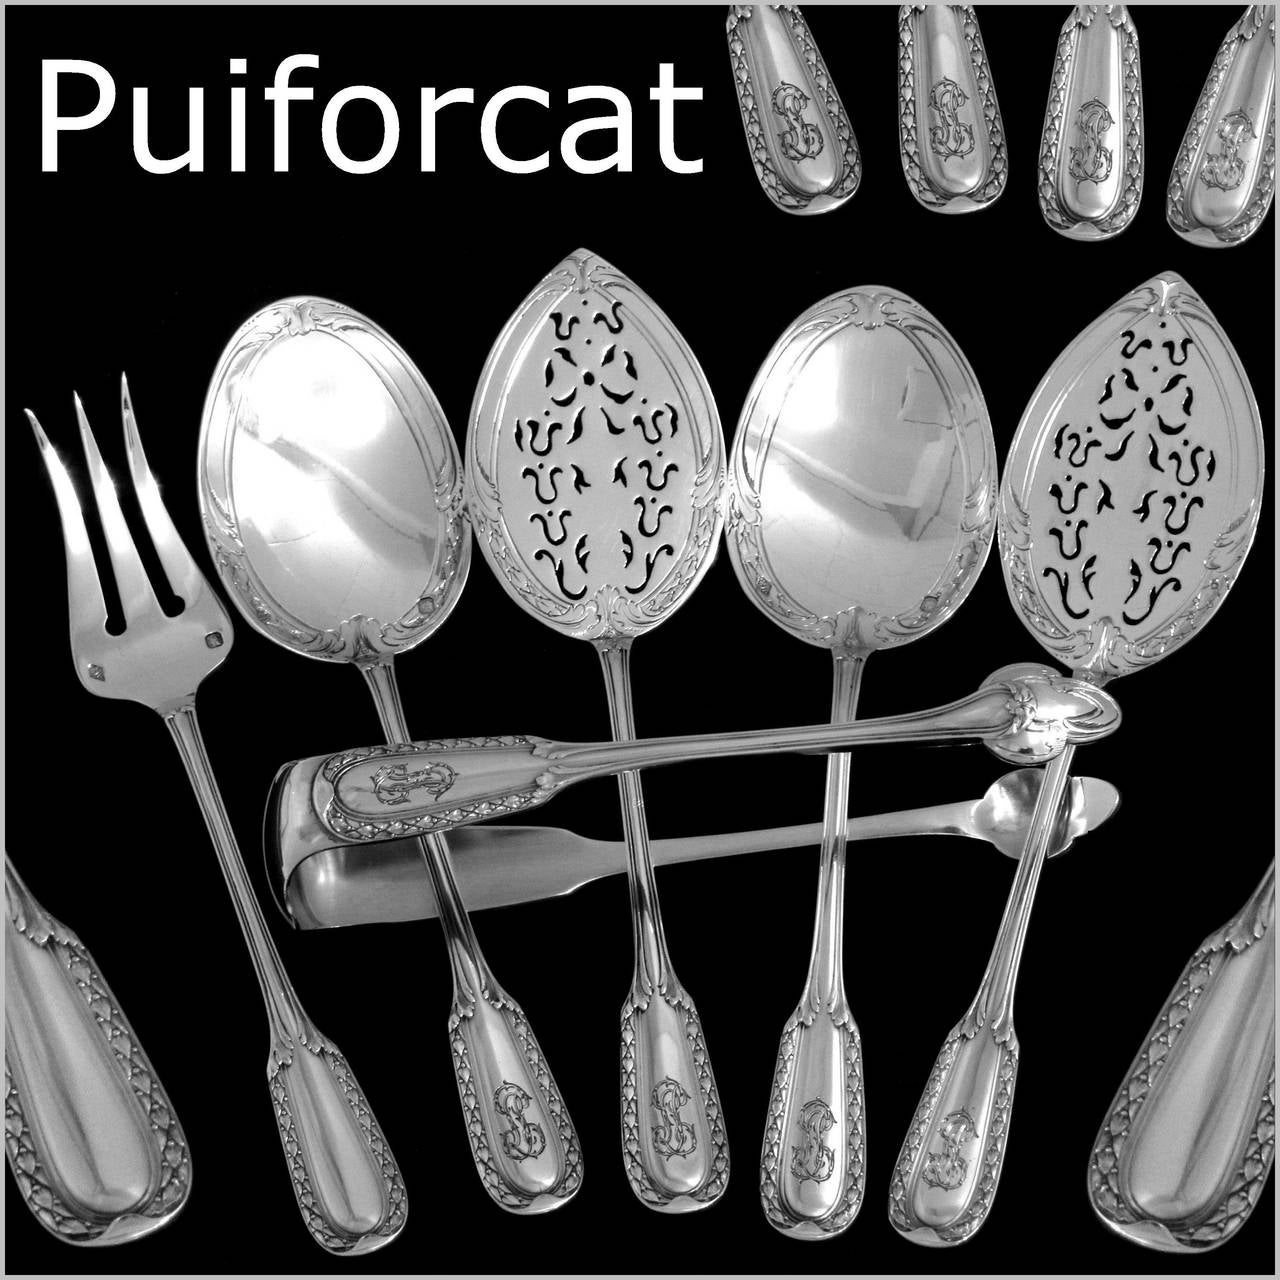 PUIFORCAT French Sterling Silver Dessert/Hors D'oeuvre Set 6 pc w/box Louis XVI Pattern

Head of Minerve 1 st titre for 950/1000 French Sterling Silver guarantee

The set includes two servers, a sugar tongs, a fork & two spoons. Six pieces,